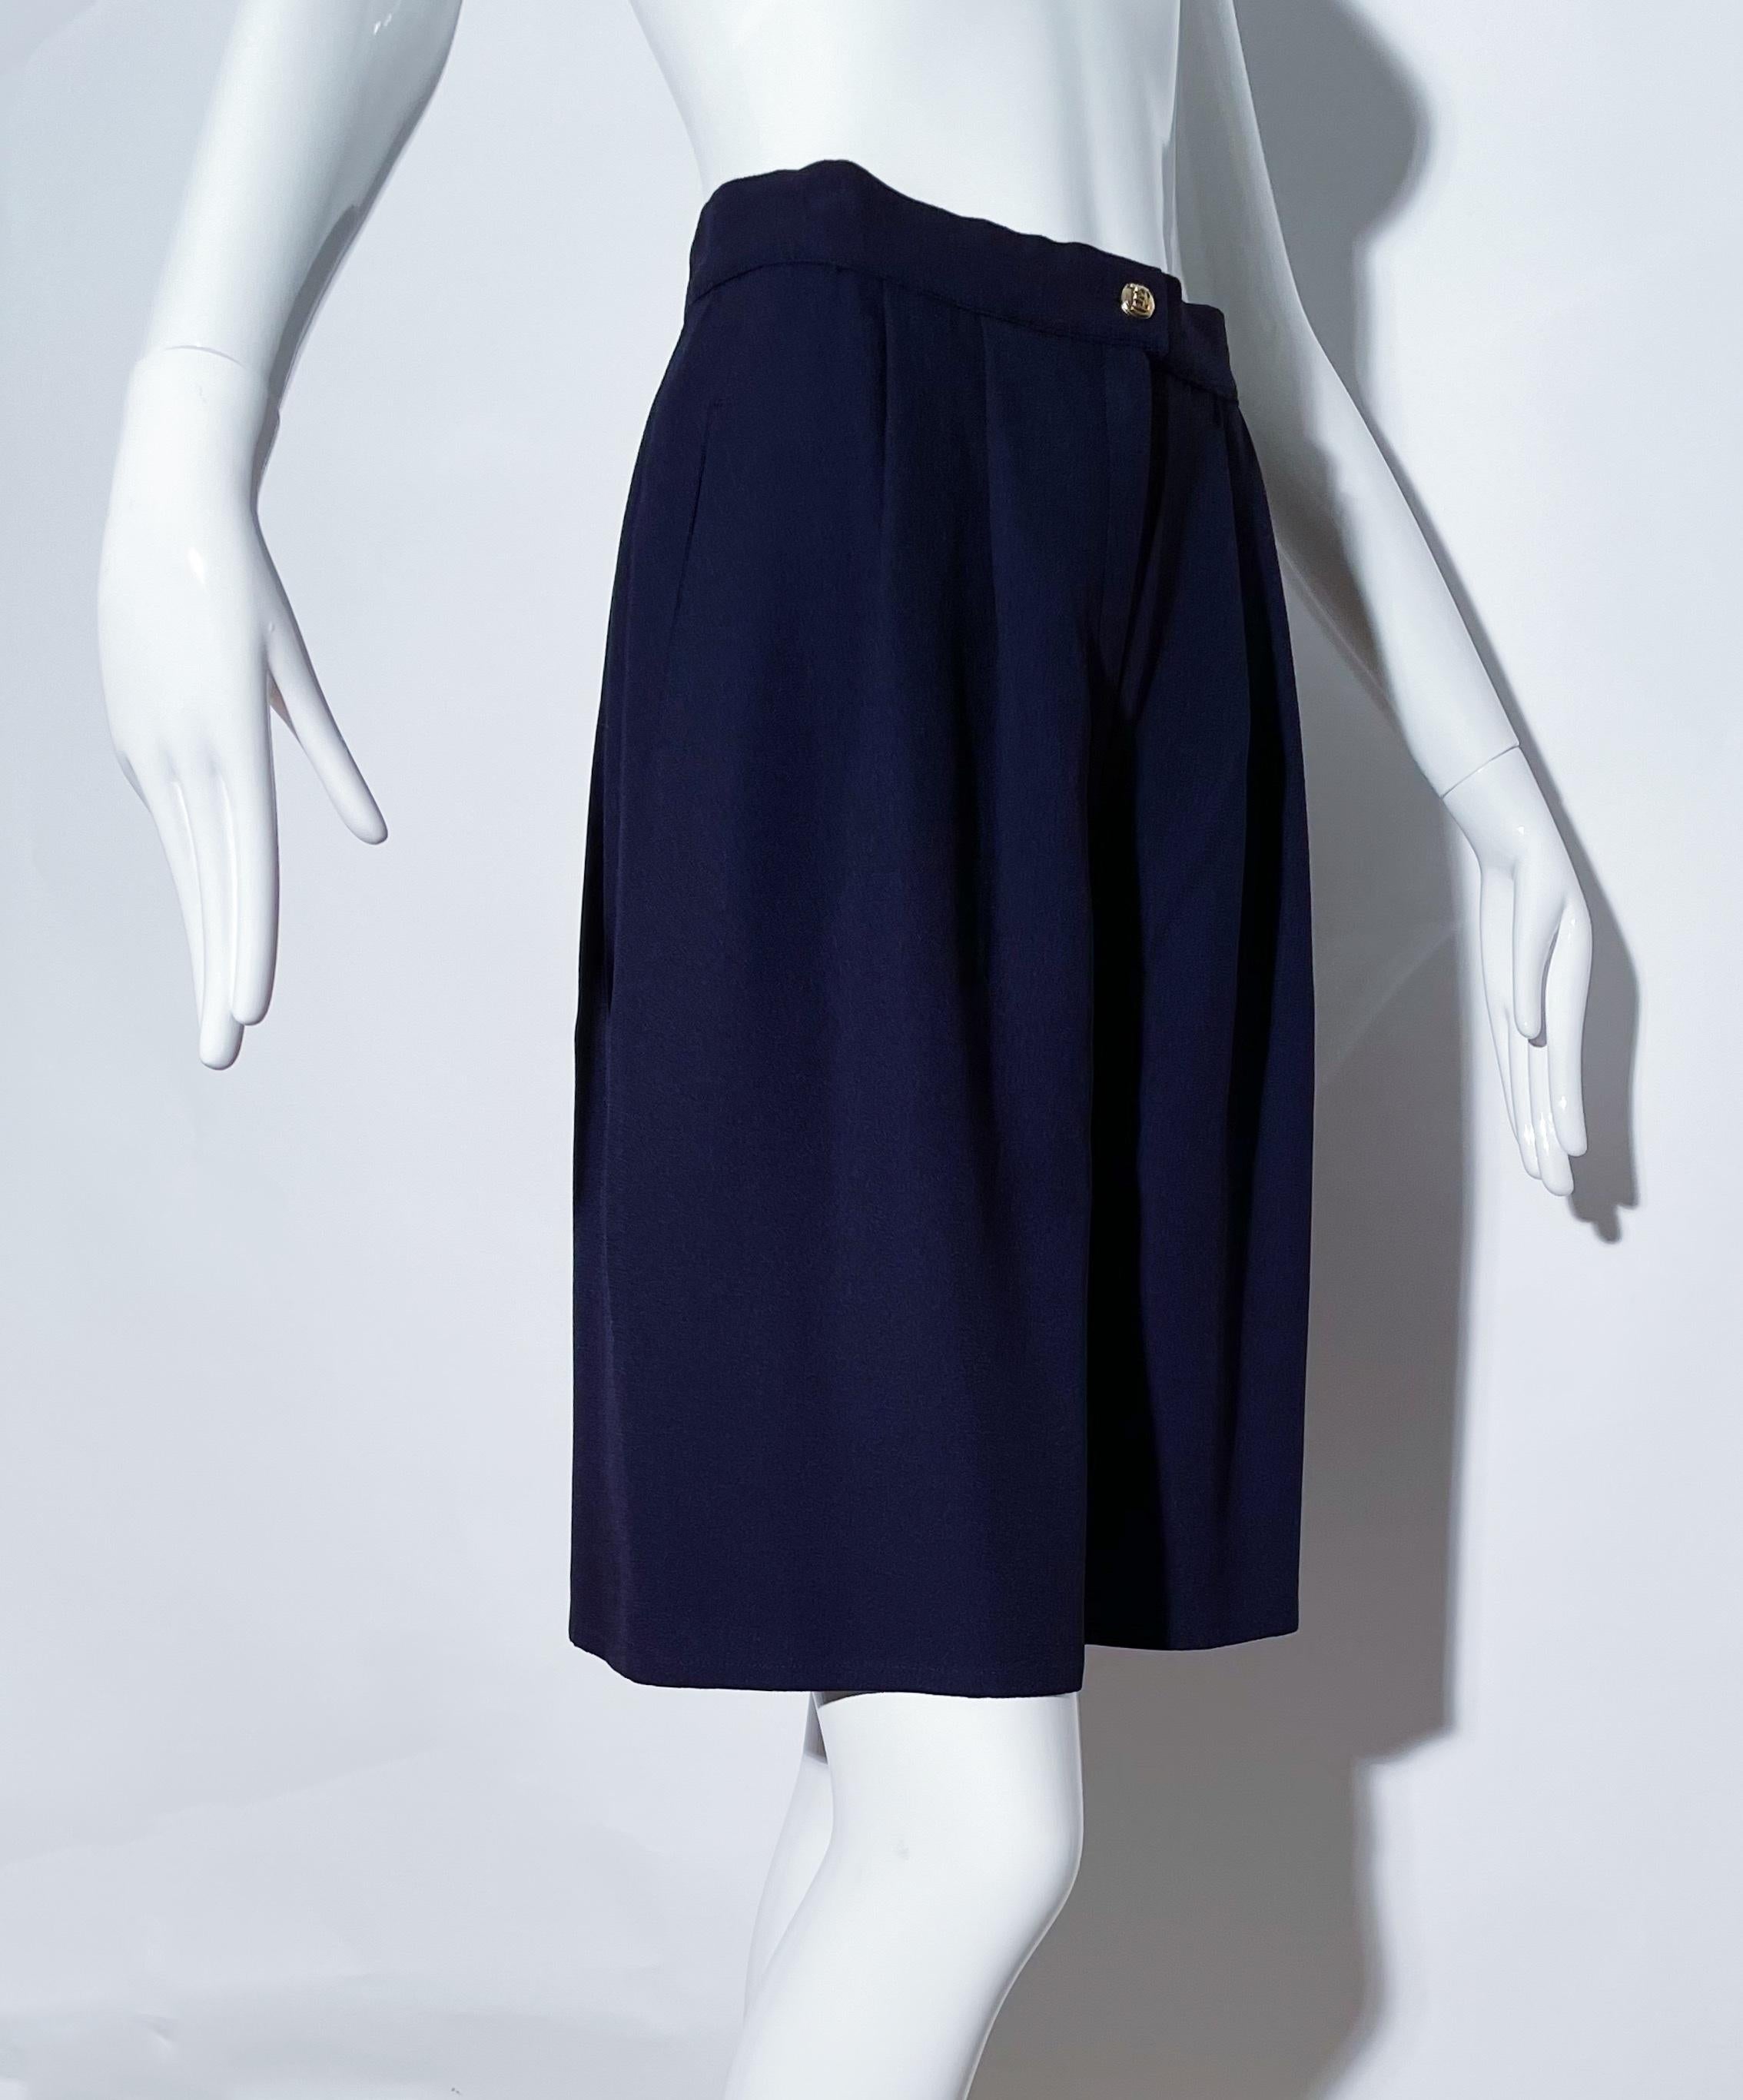 Sonia Rykiel Navy Bermuda Shorts  In Excellent Condition For Sale In Waterford, MI